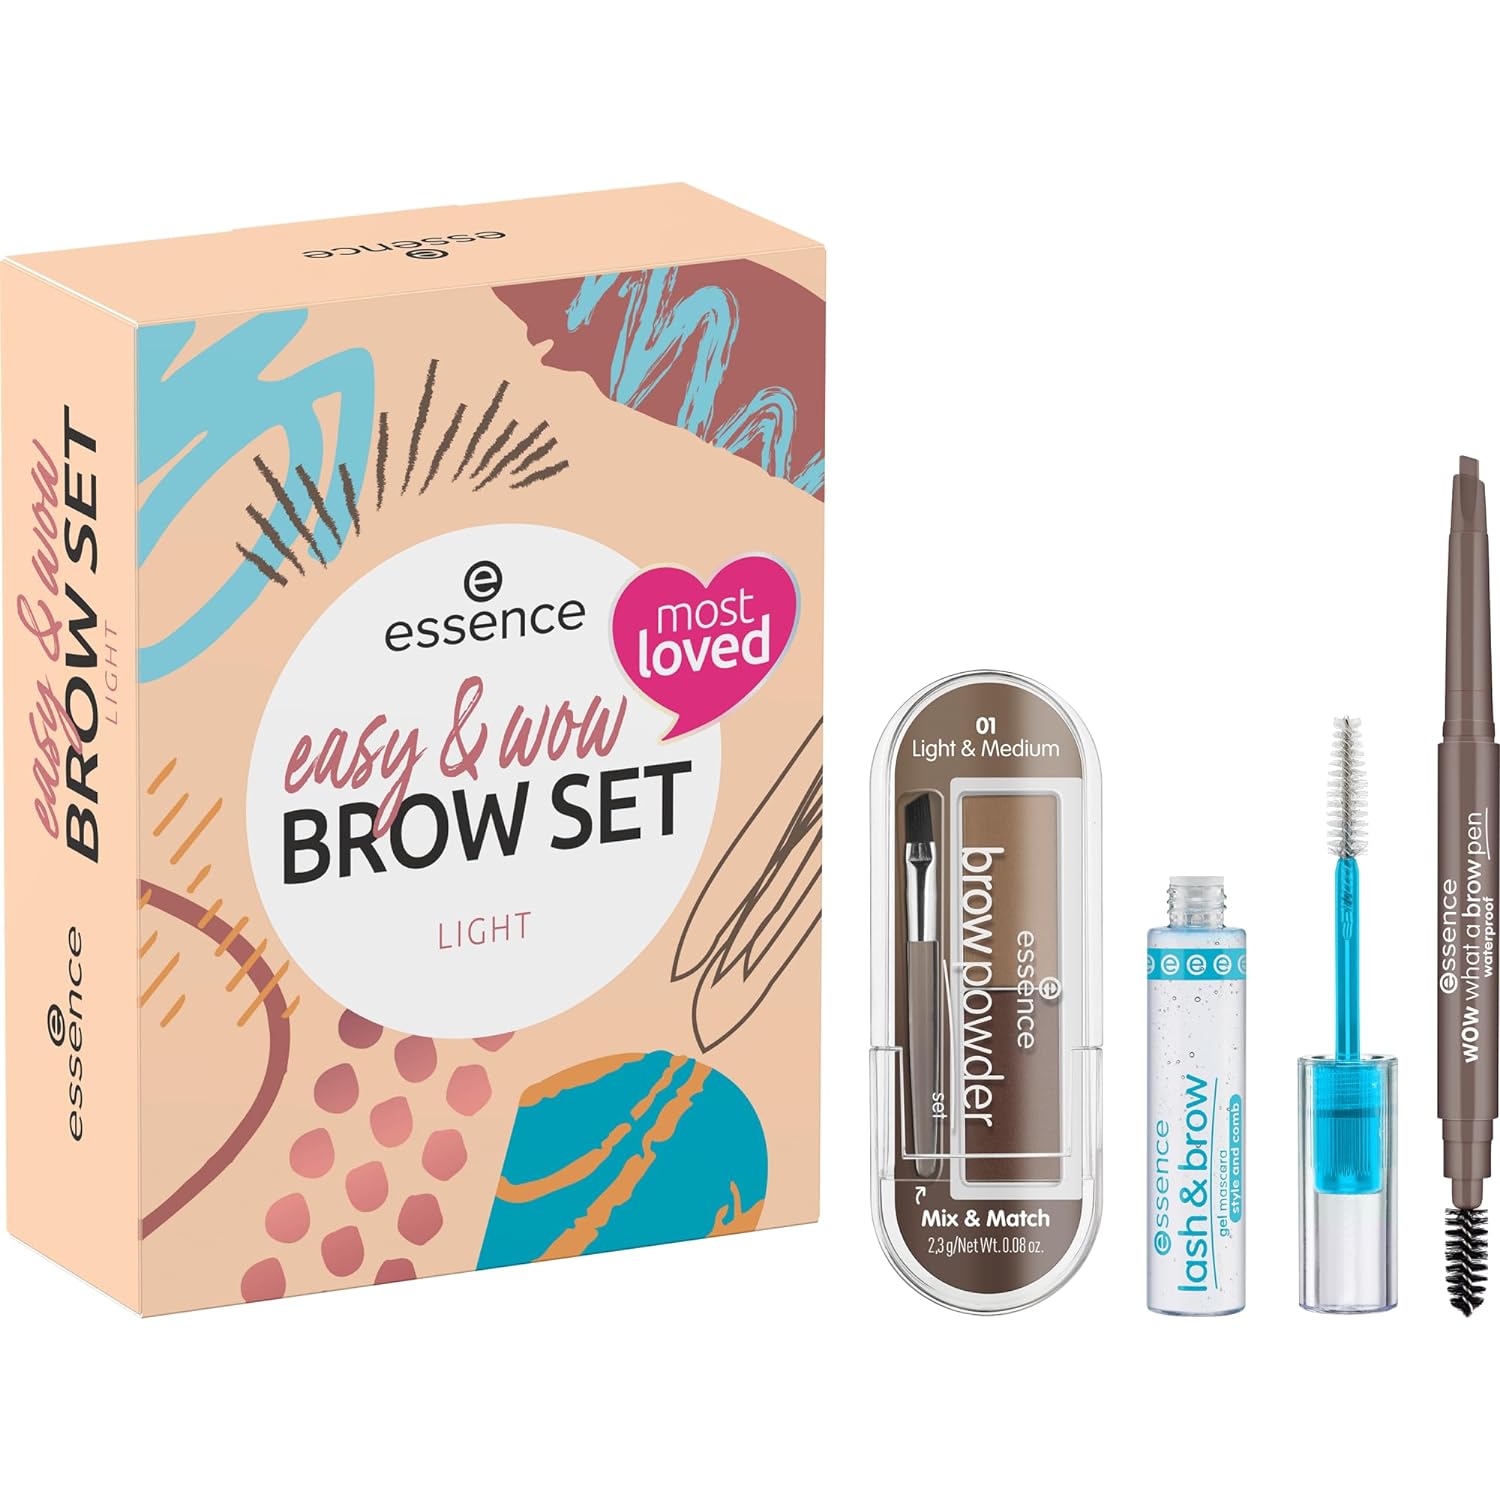 essence easy & wow brow set light, eyebrow set, acetone-free, vegan, no microplastic particles, no perfume, pack of 1 (3 pieces)